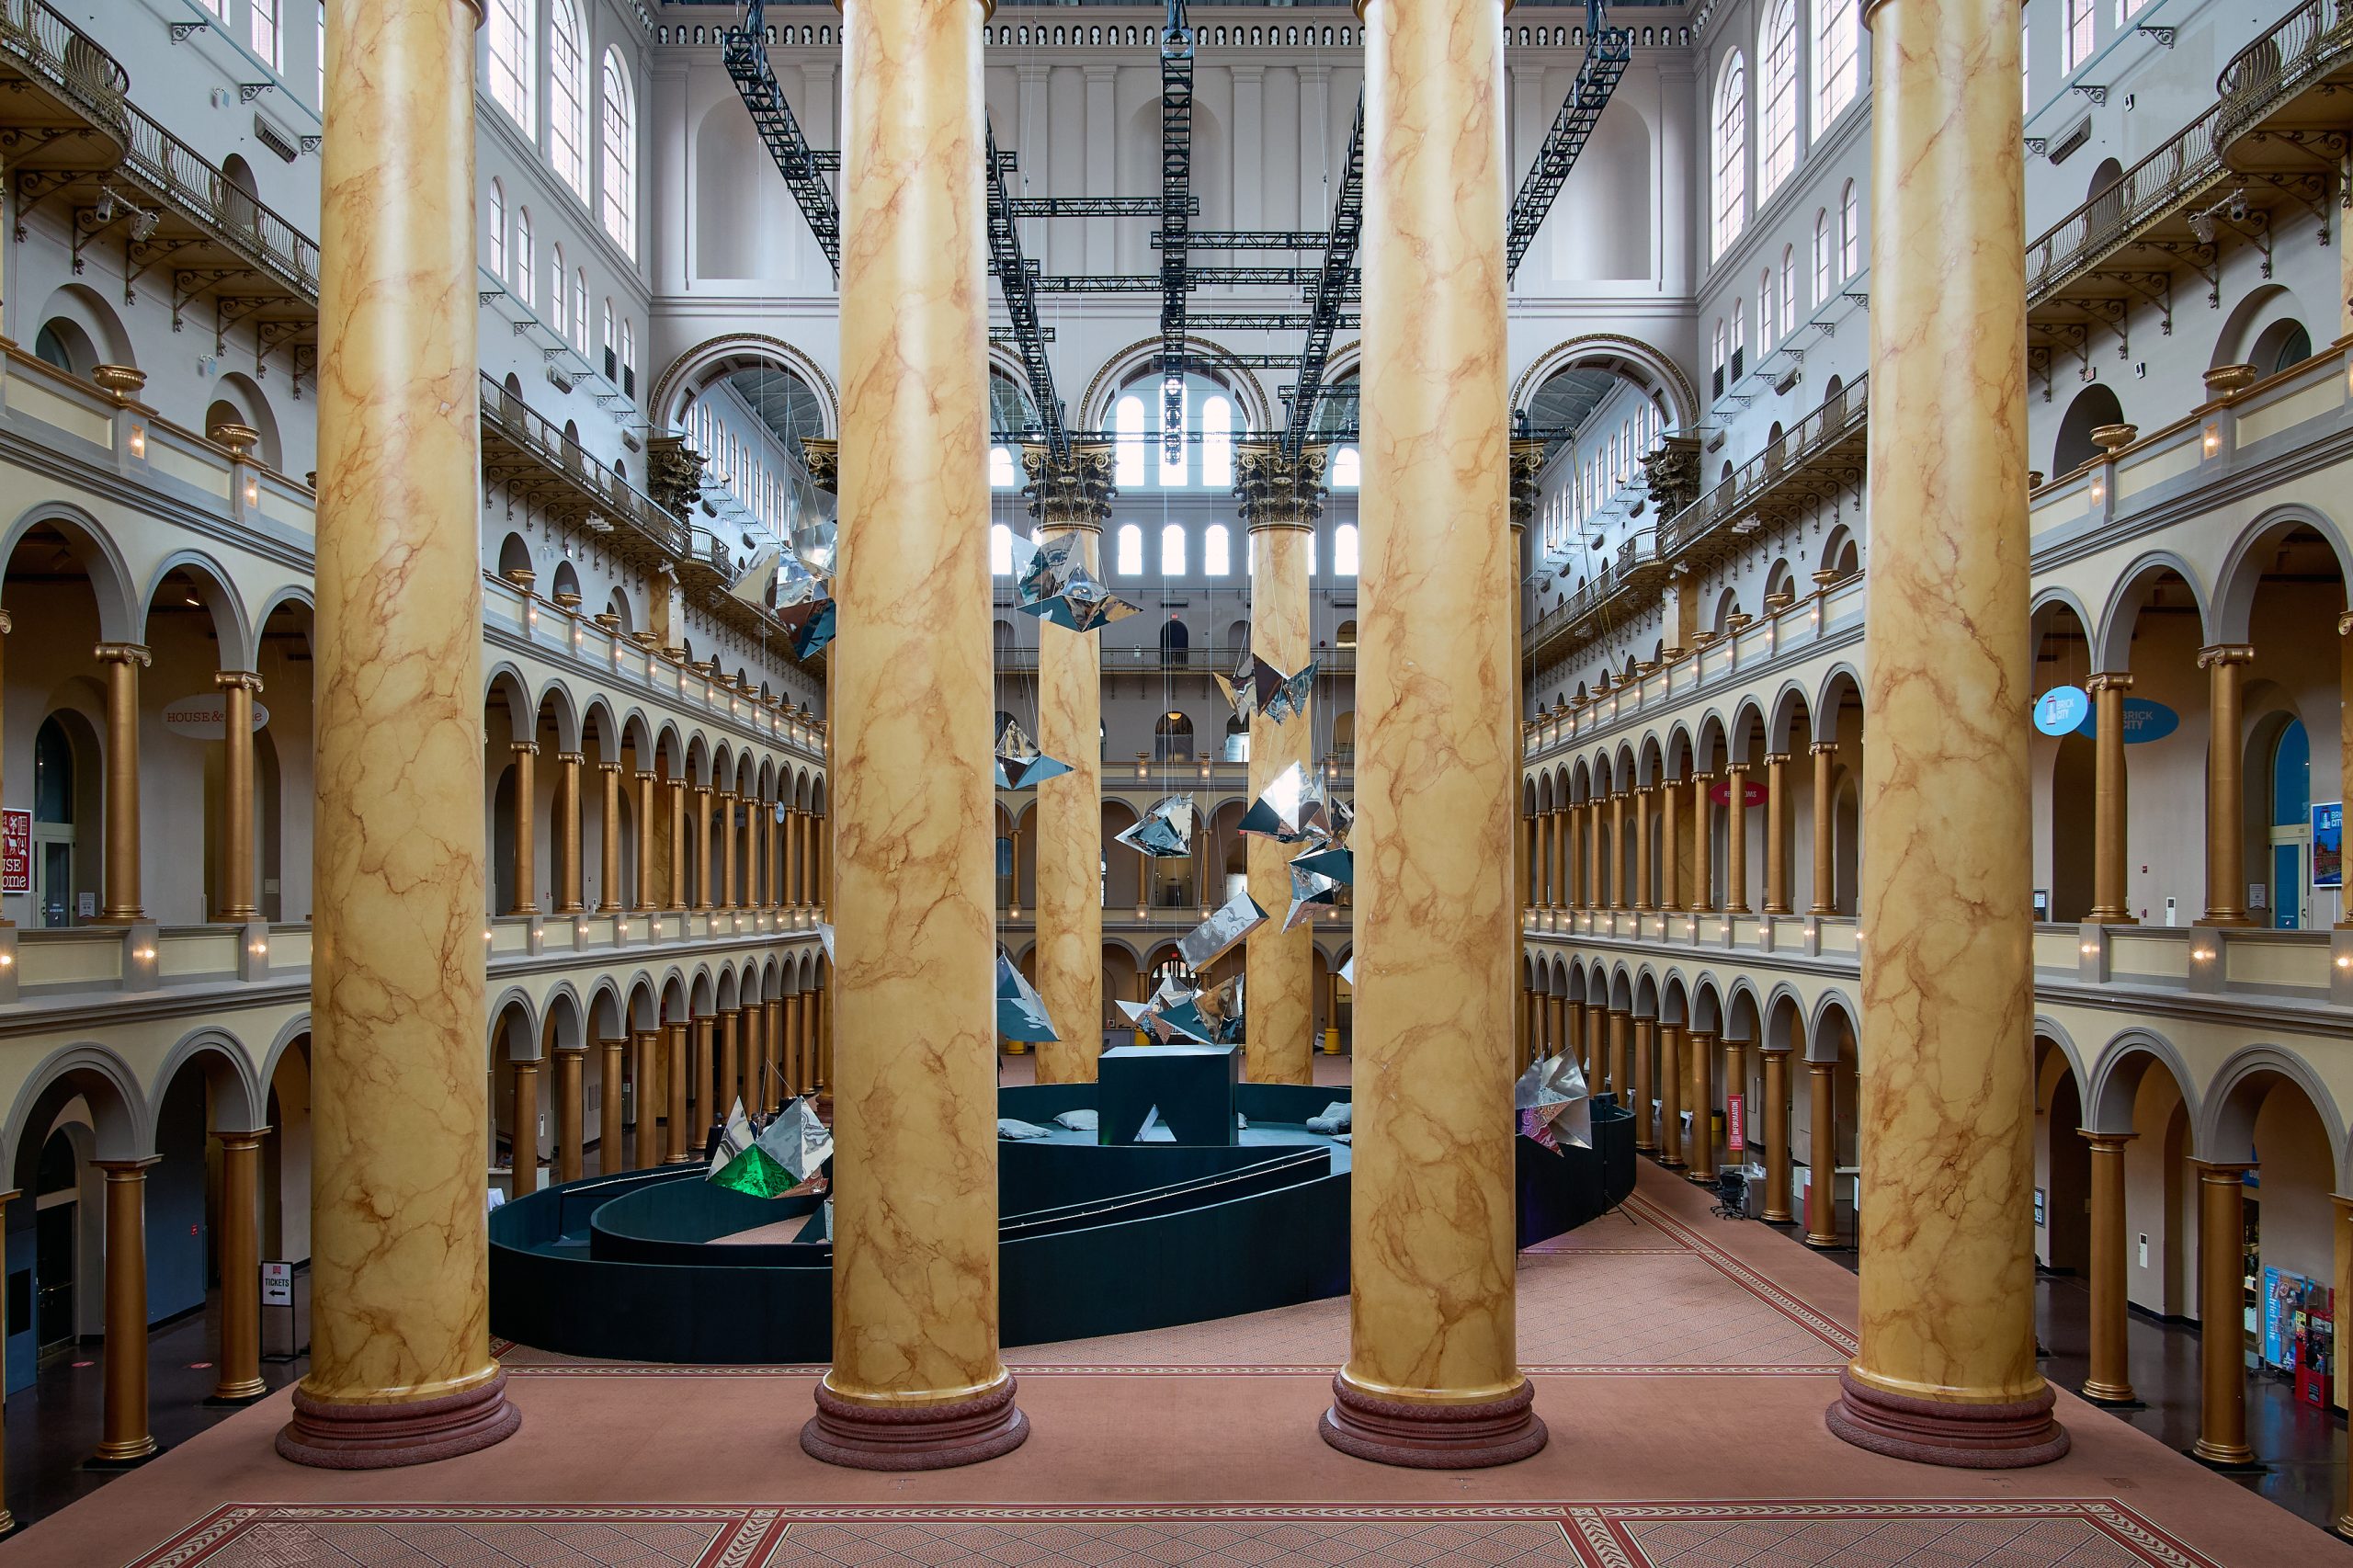 Suchi Reddy’s Colossal “Look Here” Installation at the National Building Museum